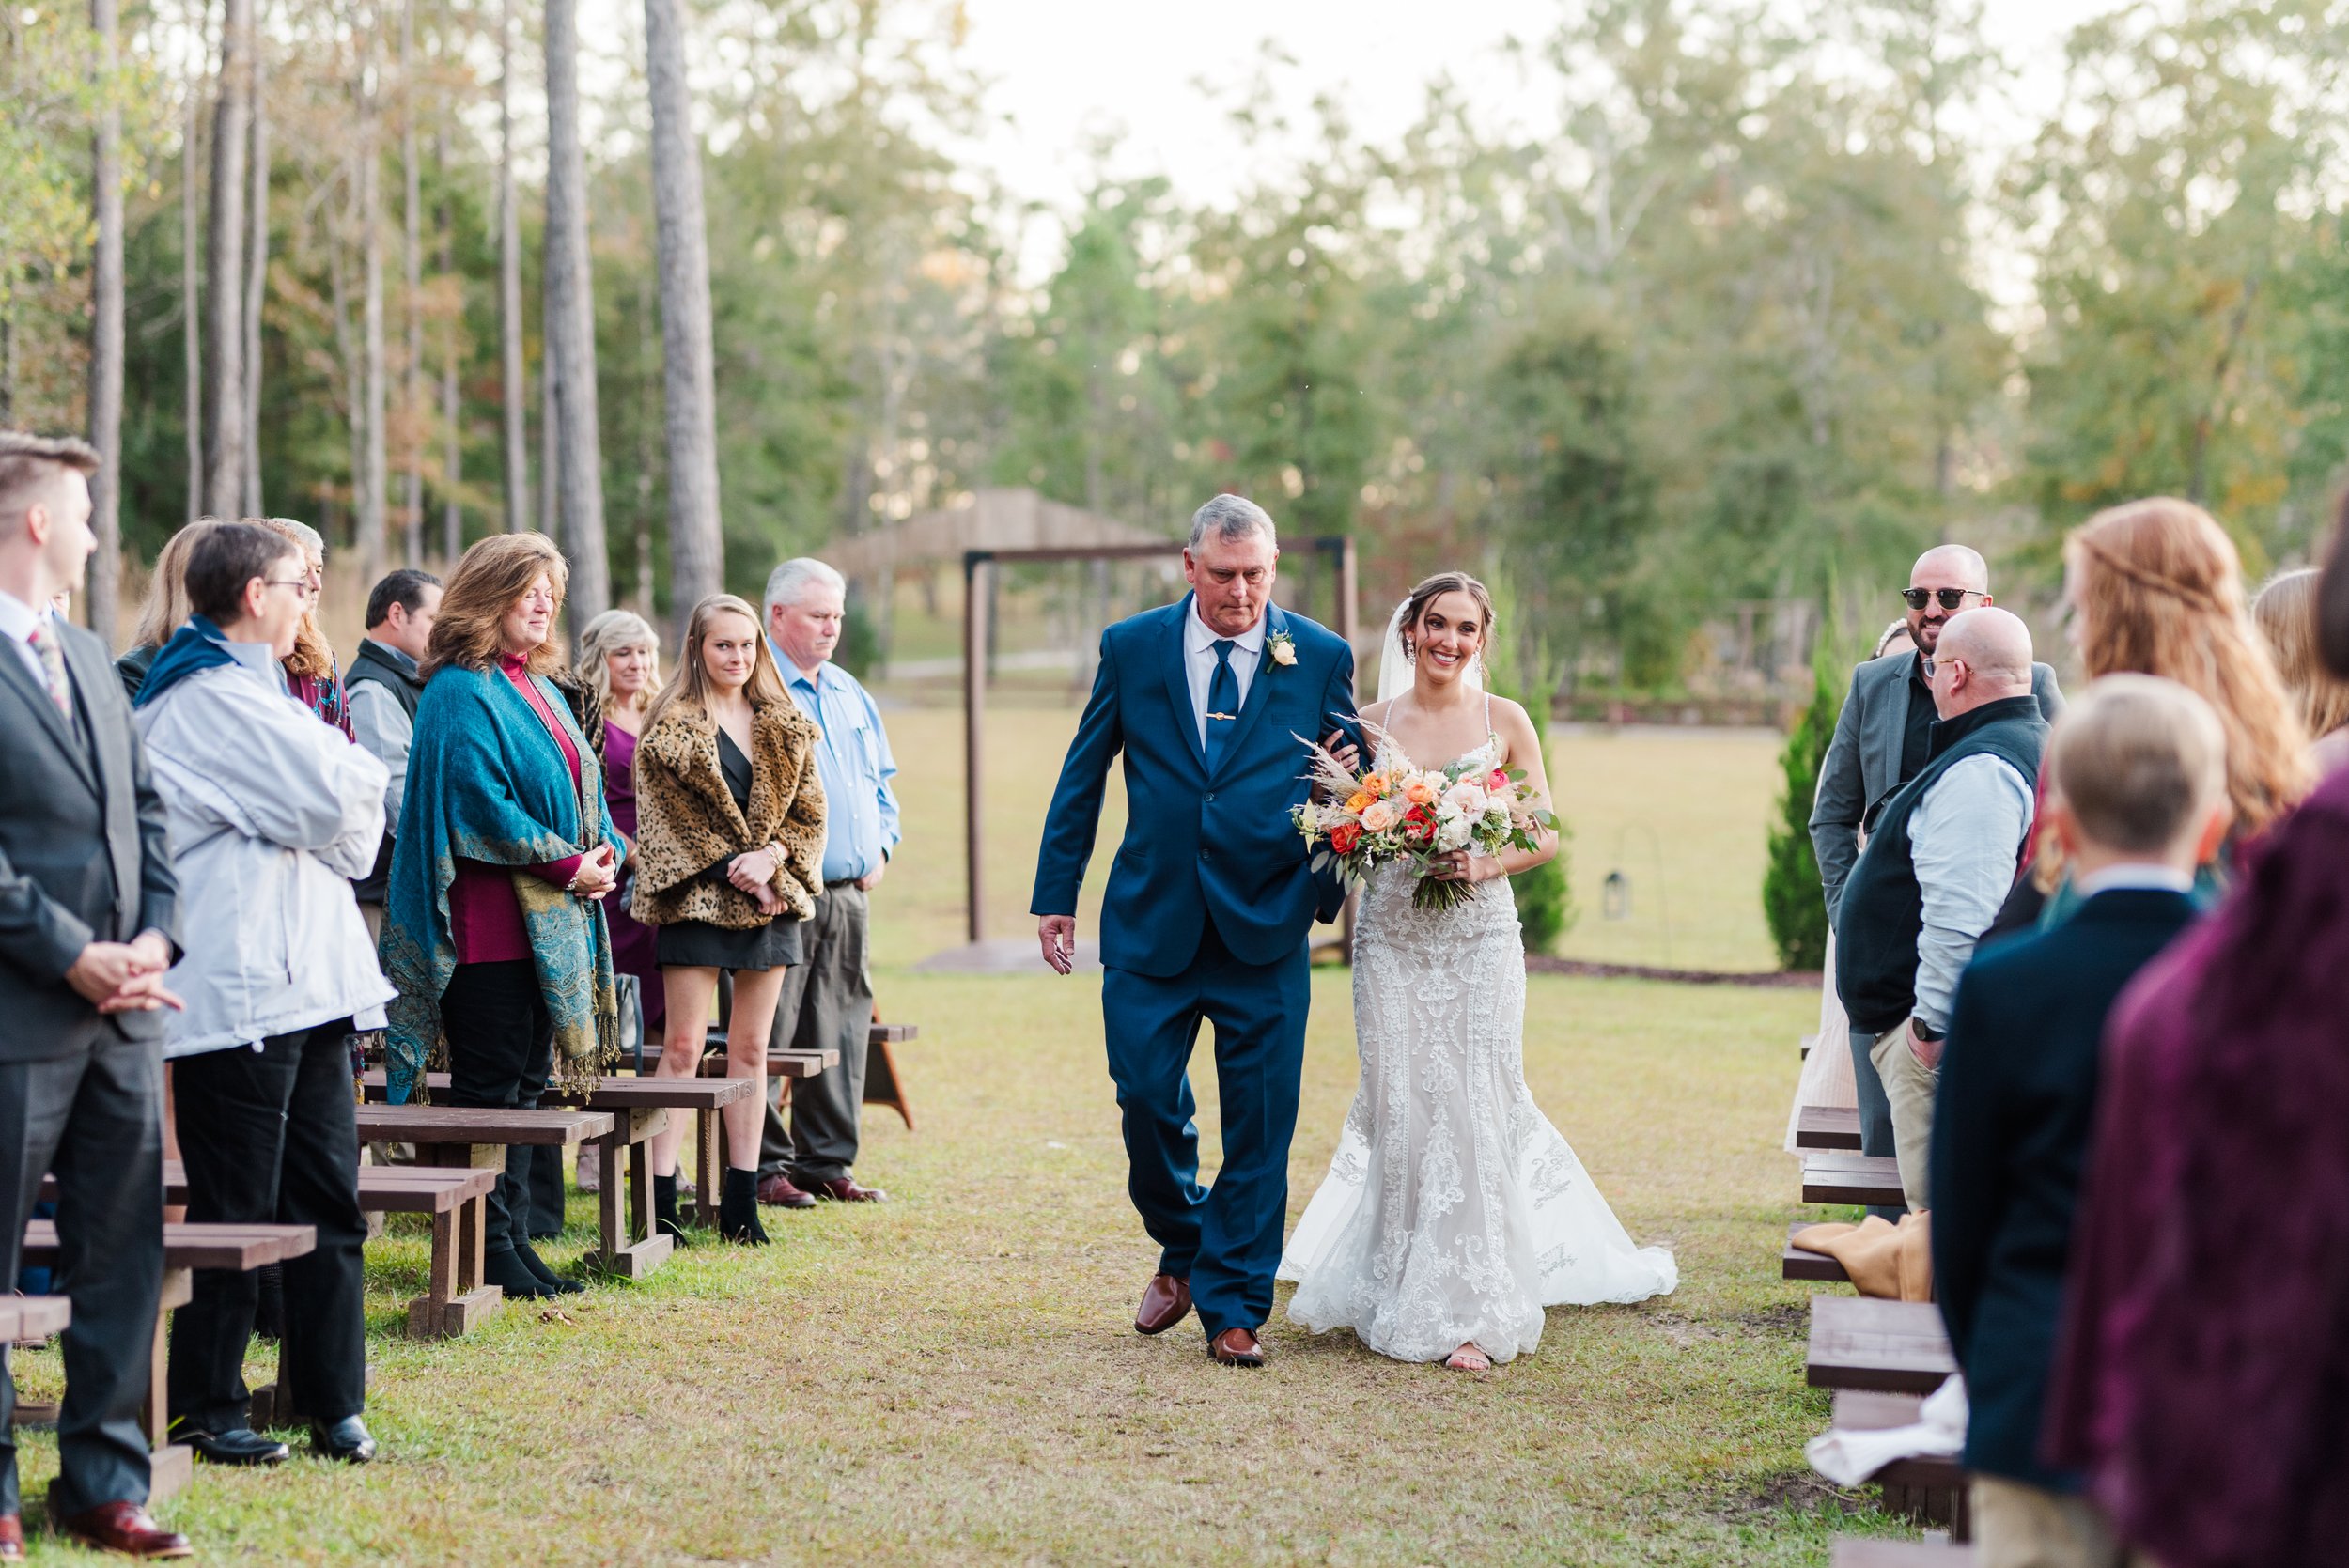 Fall Izenstone Spanish Fort Alabama Wedding in November Photographed by Kristen Marcus Photography